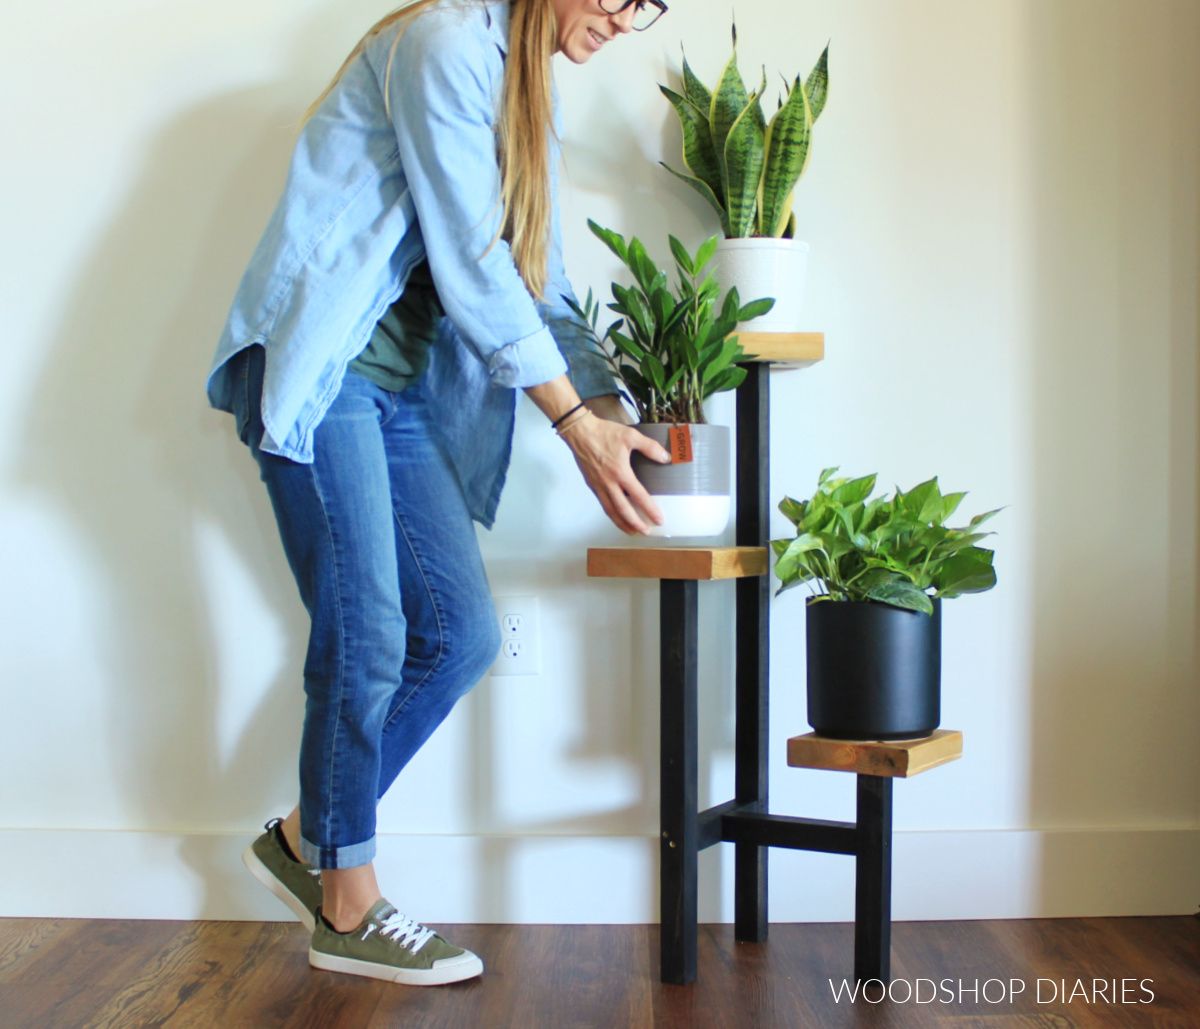 Diy Tiered Plant Stand | From Scrap Wood! Regarding Black Plant Stands (View 14 of 15)